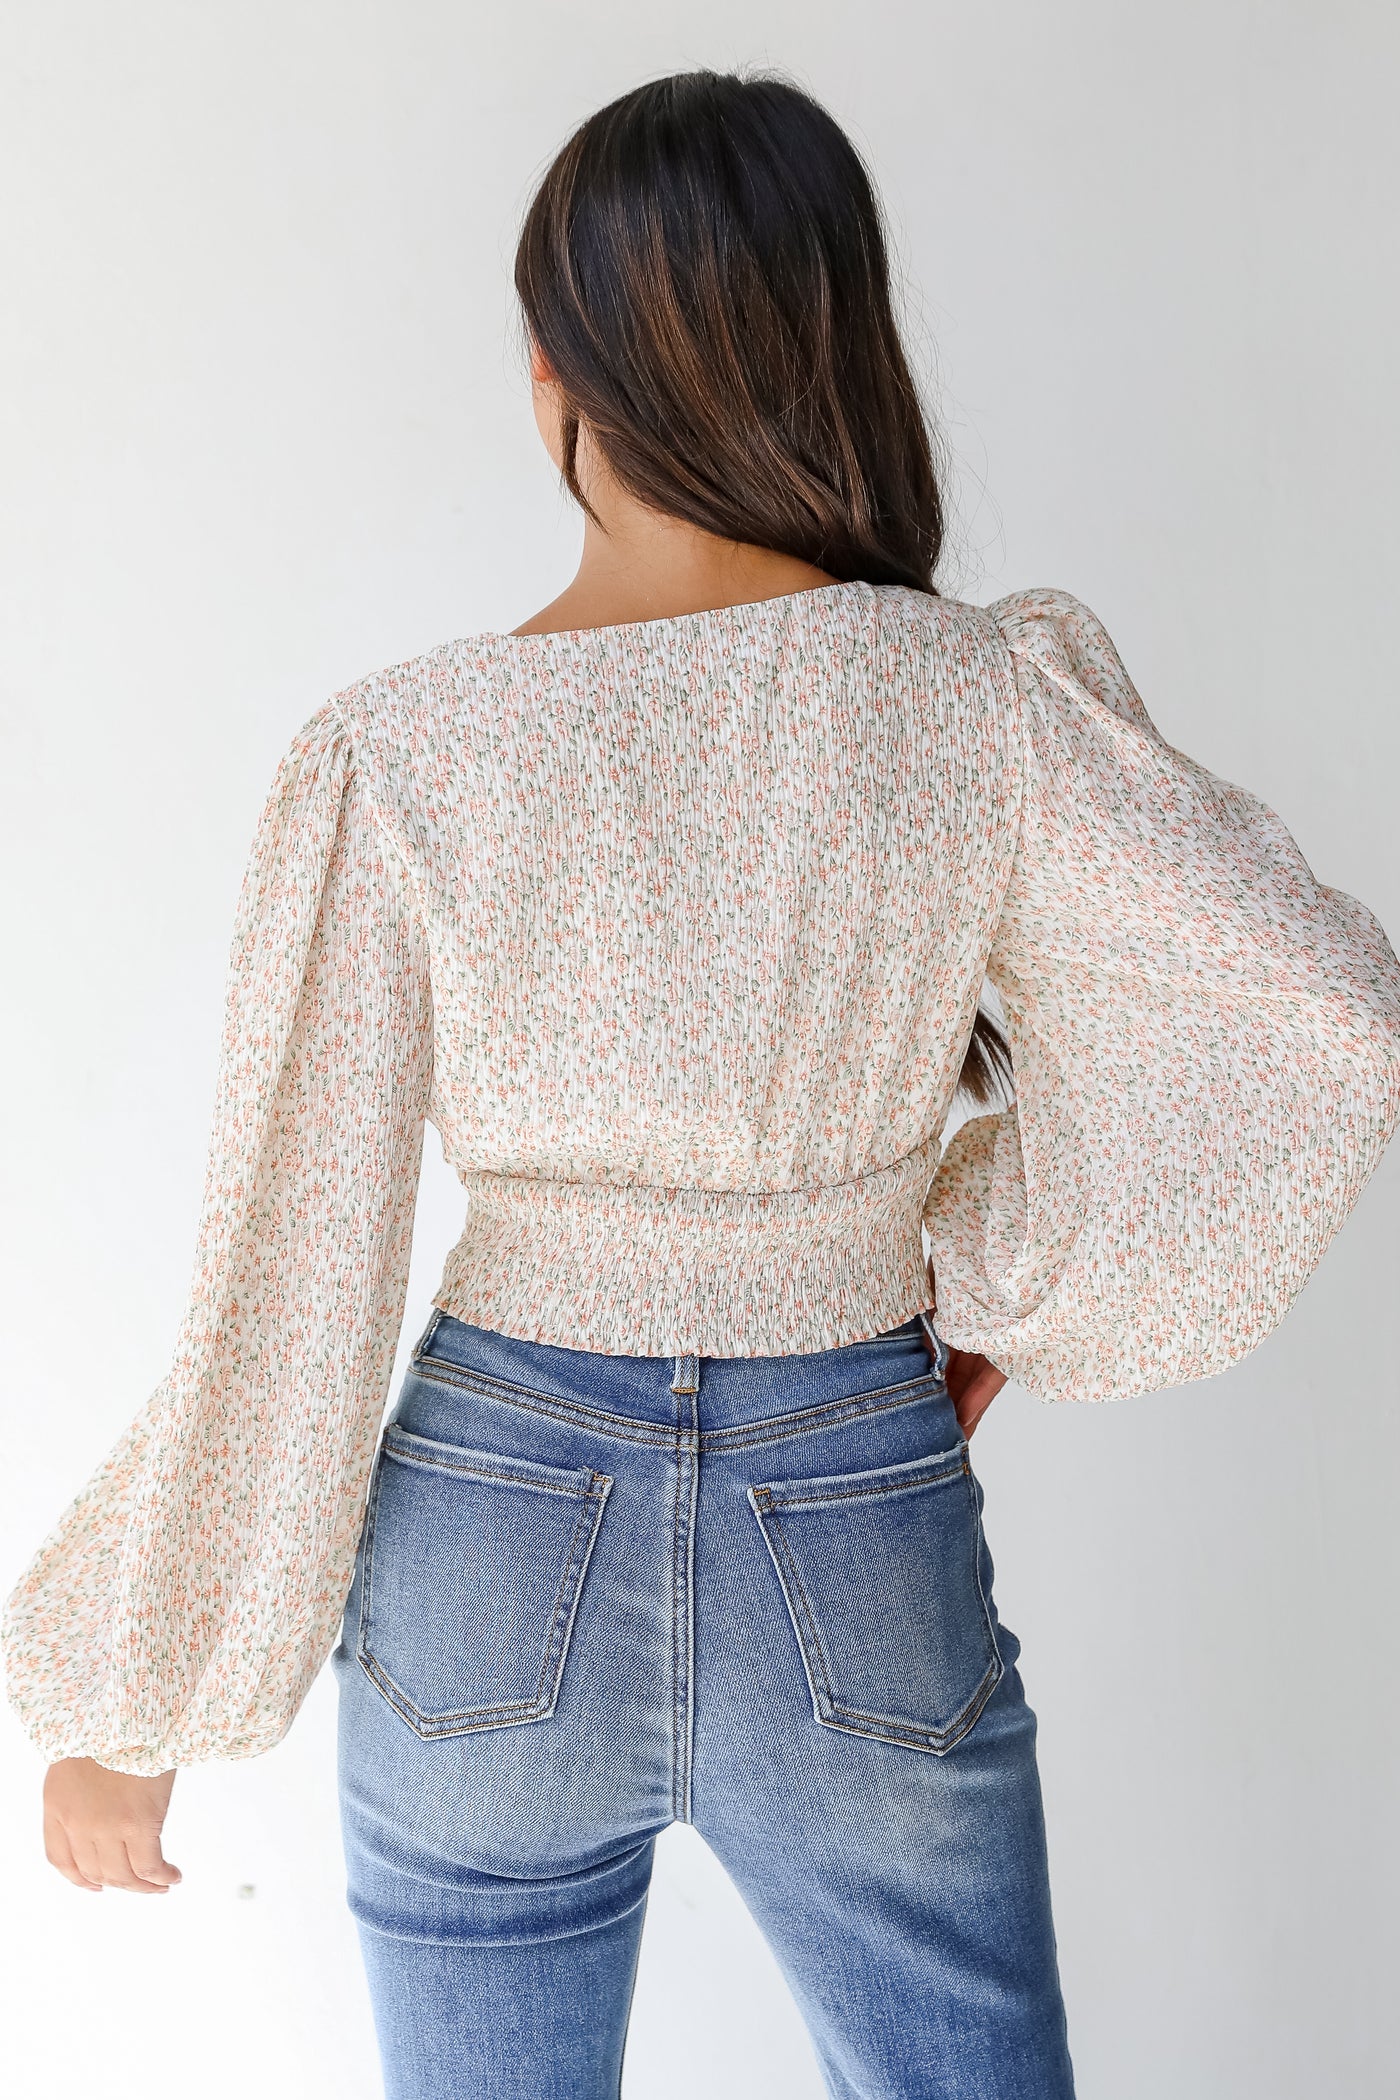 Floral Cropped Blouse back view